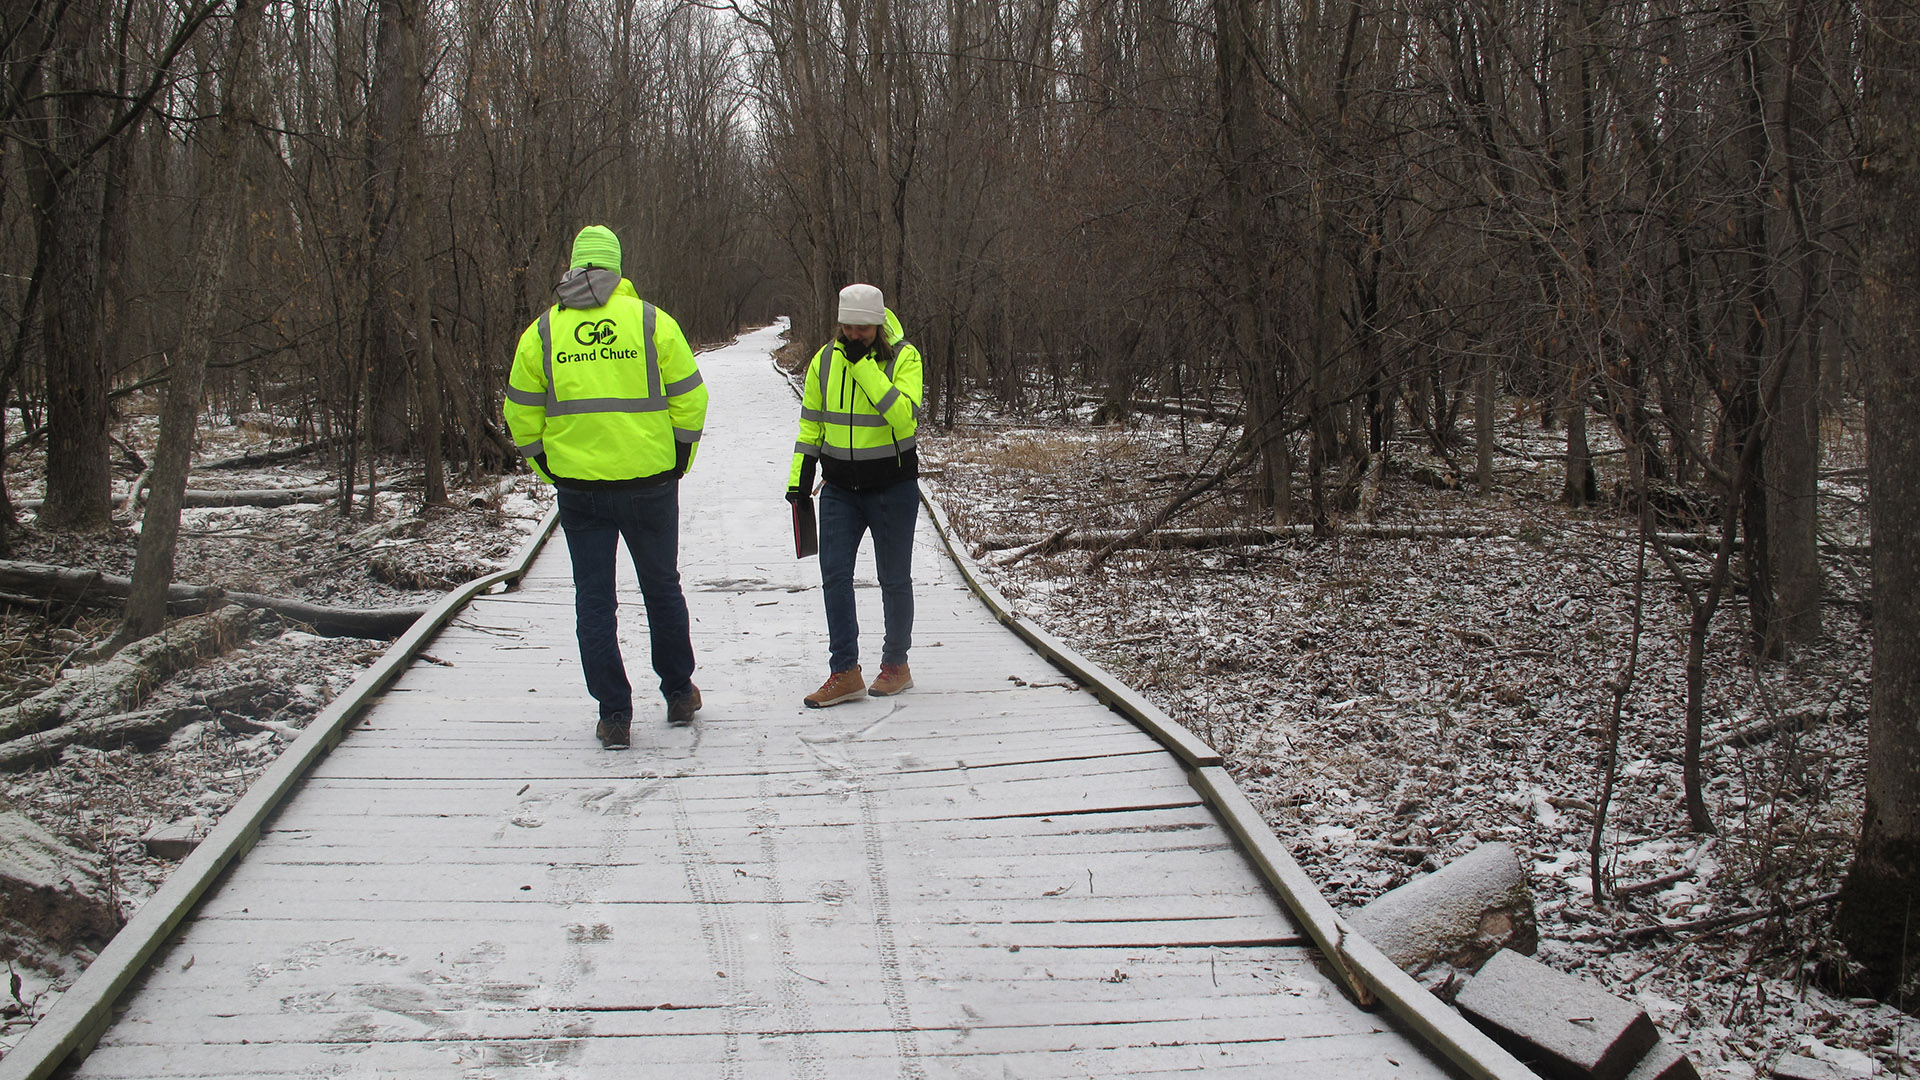 Two people wearing neon reflective jackets stand on a snow-dusted boardwalk passing through a wooded area.